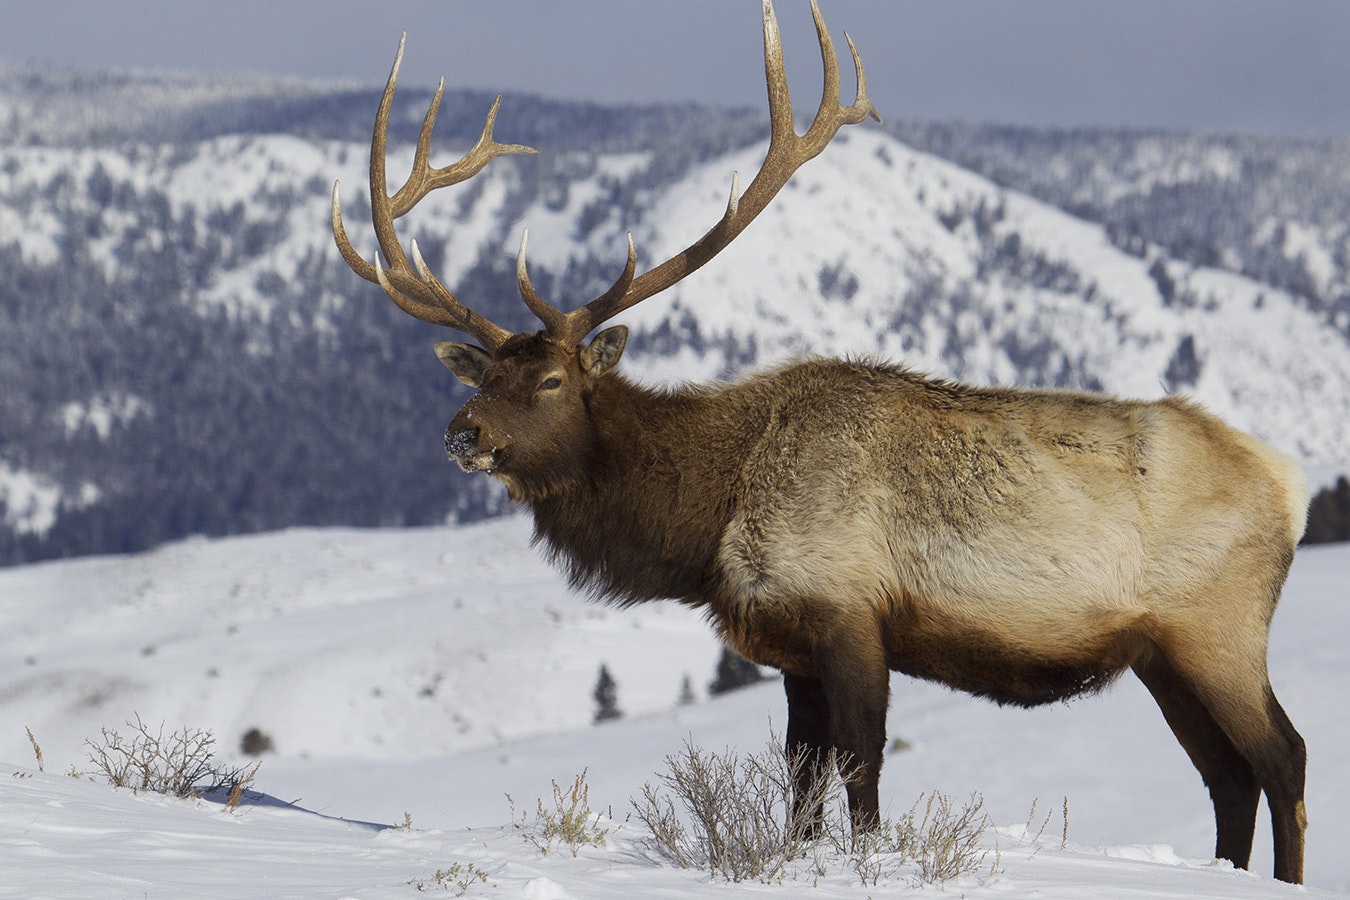 Even with elk tags pushing $2,000, people are still clamoring to hunt in Wyoming.